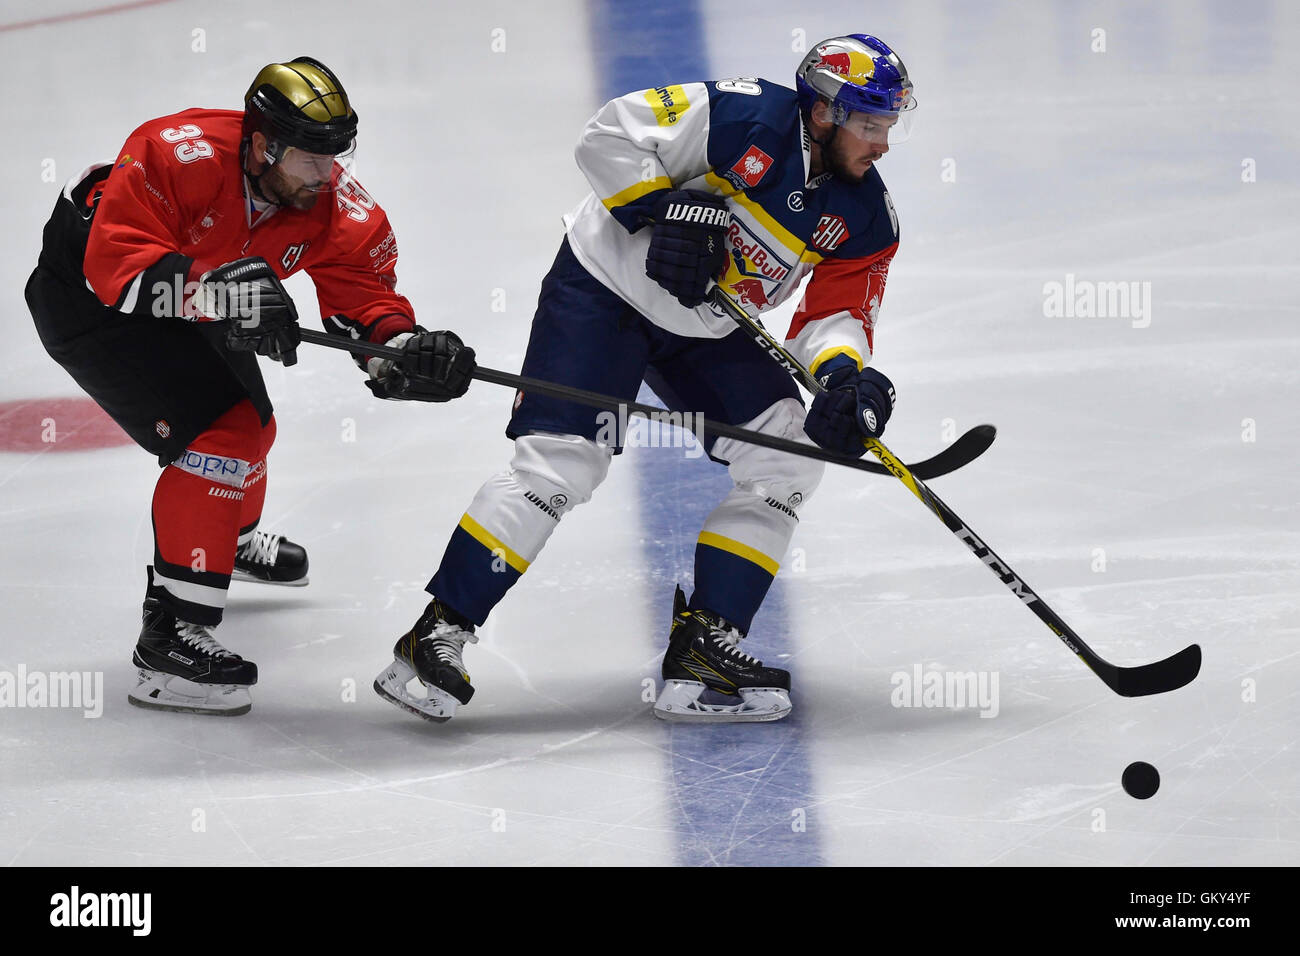 Znojmo, Czech Republic. 23rd Aug, 2016. From left: Peter Pucher of Znojmo  and Florian Kettemer of Munich in action during the Orli Znojmo vs EHC Red  Bull Munchen Champions Hockey League F